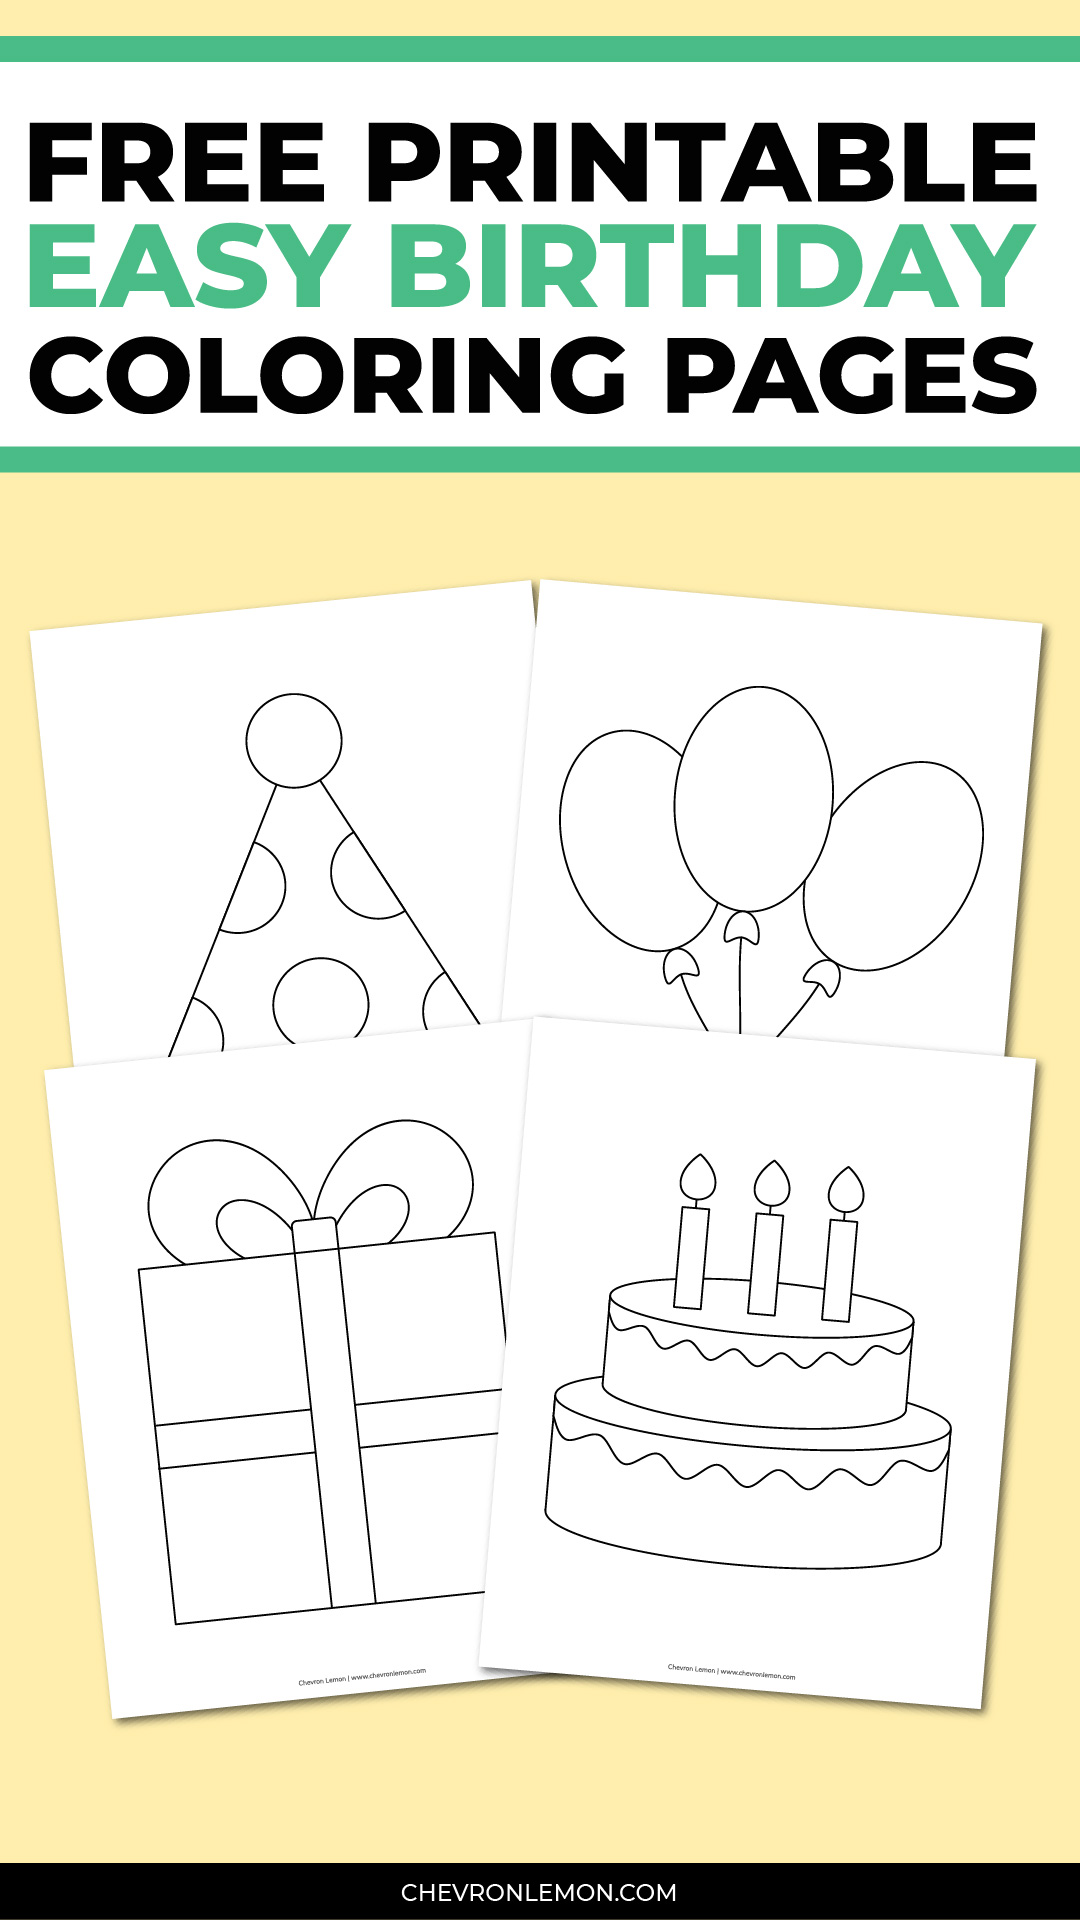 Printable birthday coloring pages